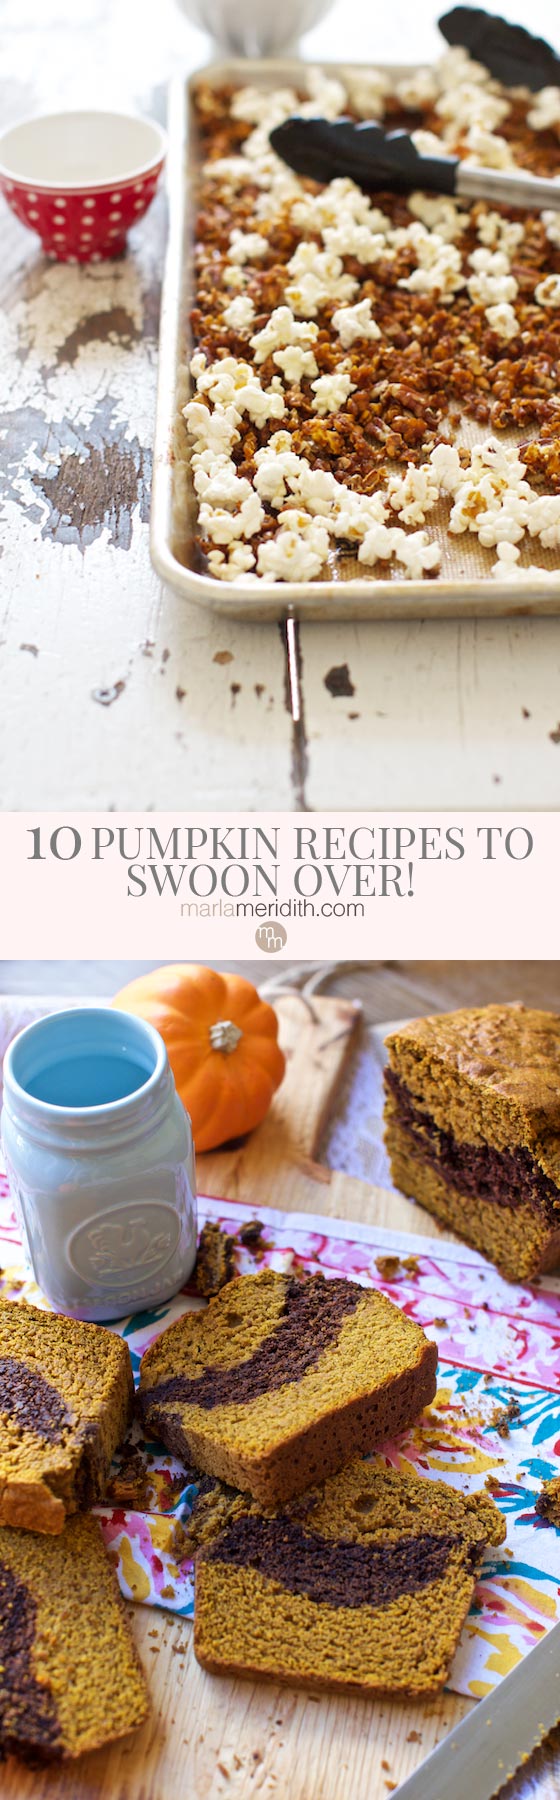 10 Pumpkin Recipes to Swoon Over! Get in on all the tasty details on MarlaMeridith.com